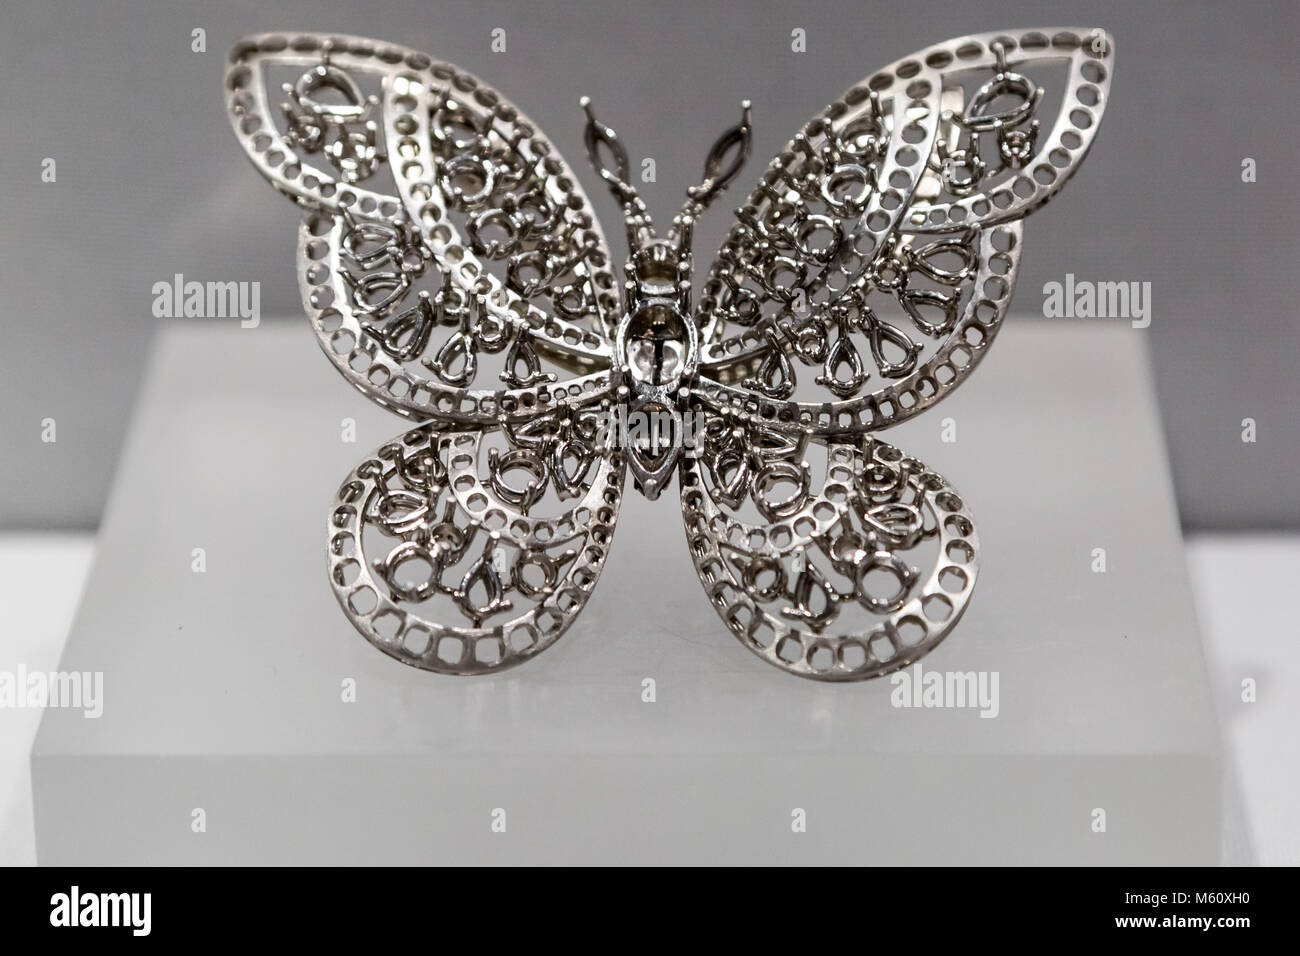 London, UK. 27th Feb, 2018. Goldsmiths' Craftmanship & Design Council Awards Exhibition. Butterfly Brooch by Oliver Davies. Gold award junior. Credit: Guy Corbishley/Alamy Live News Stock Photo